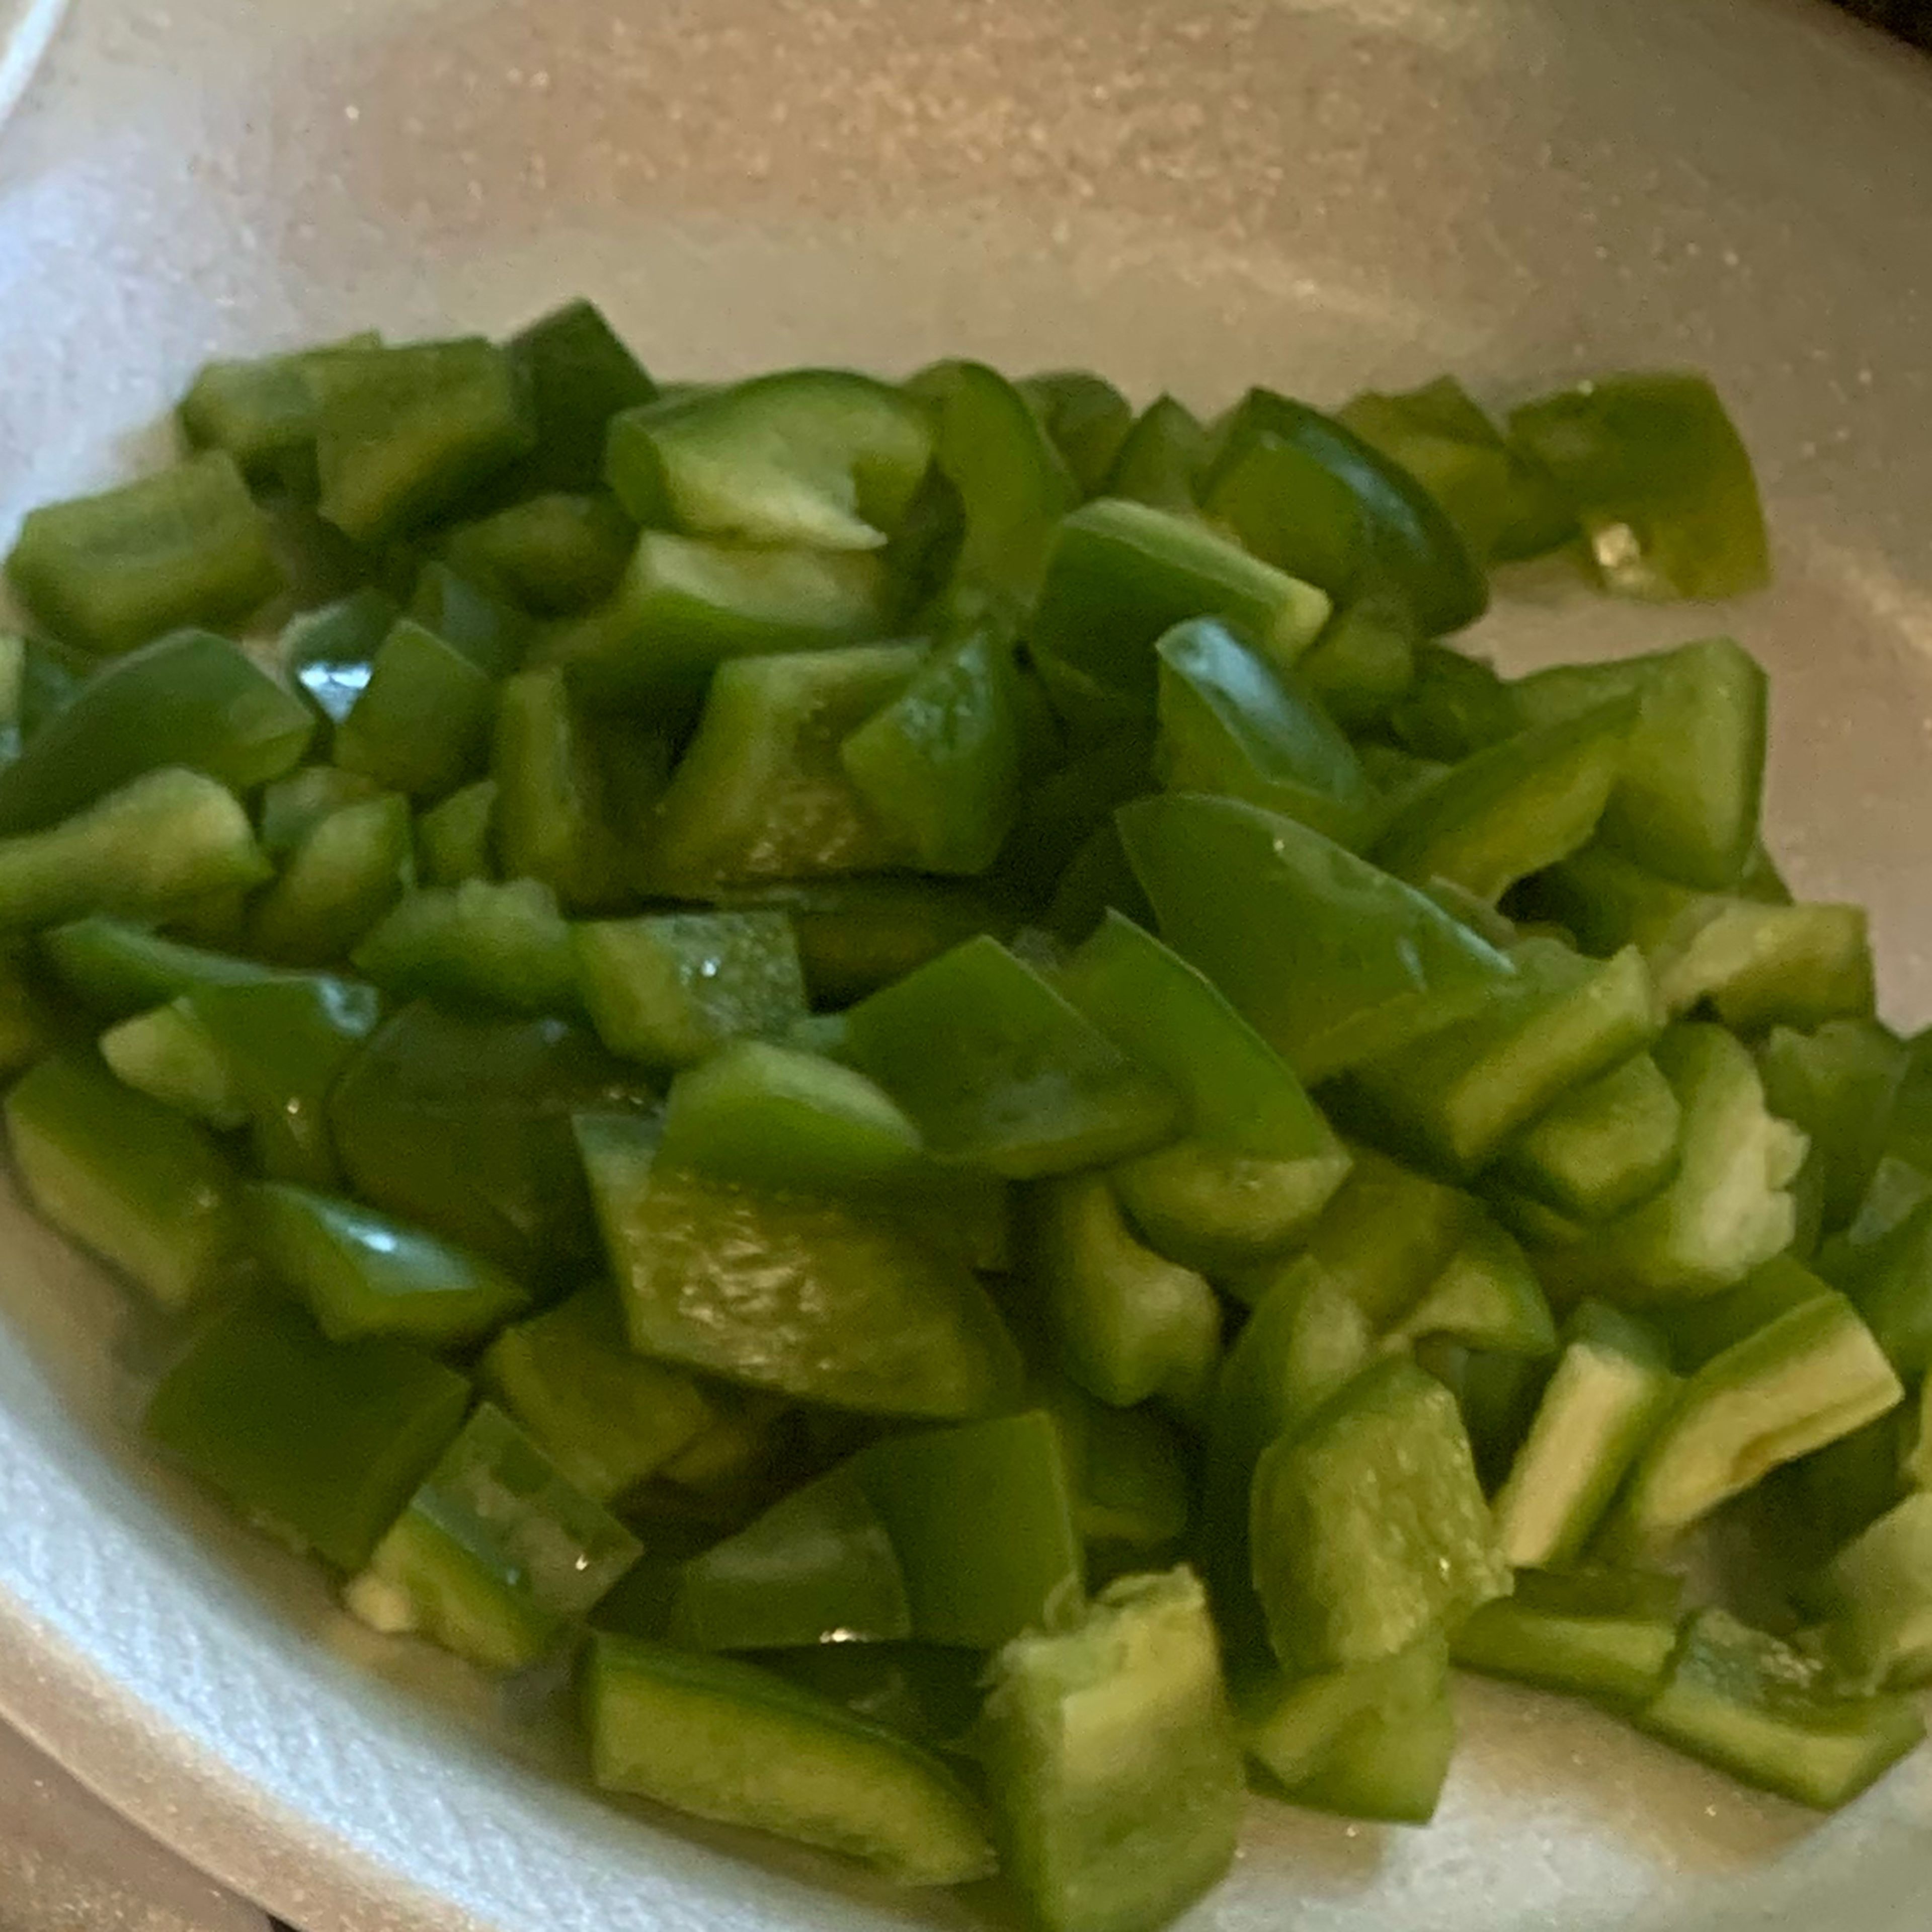 Rinse your bell peppers and then chop them into a medium dice being sure not to keep any of the ribs and seeds. Next rinse your green onion and then chop off the hairy ends. From the bottom of the scallion and up you’ll chop them and you’ll then set them aside for later use if desired.